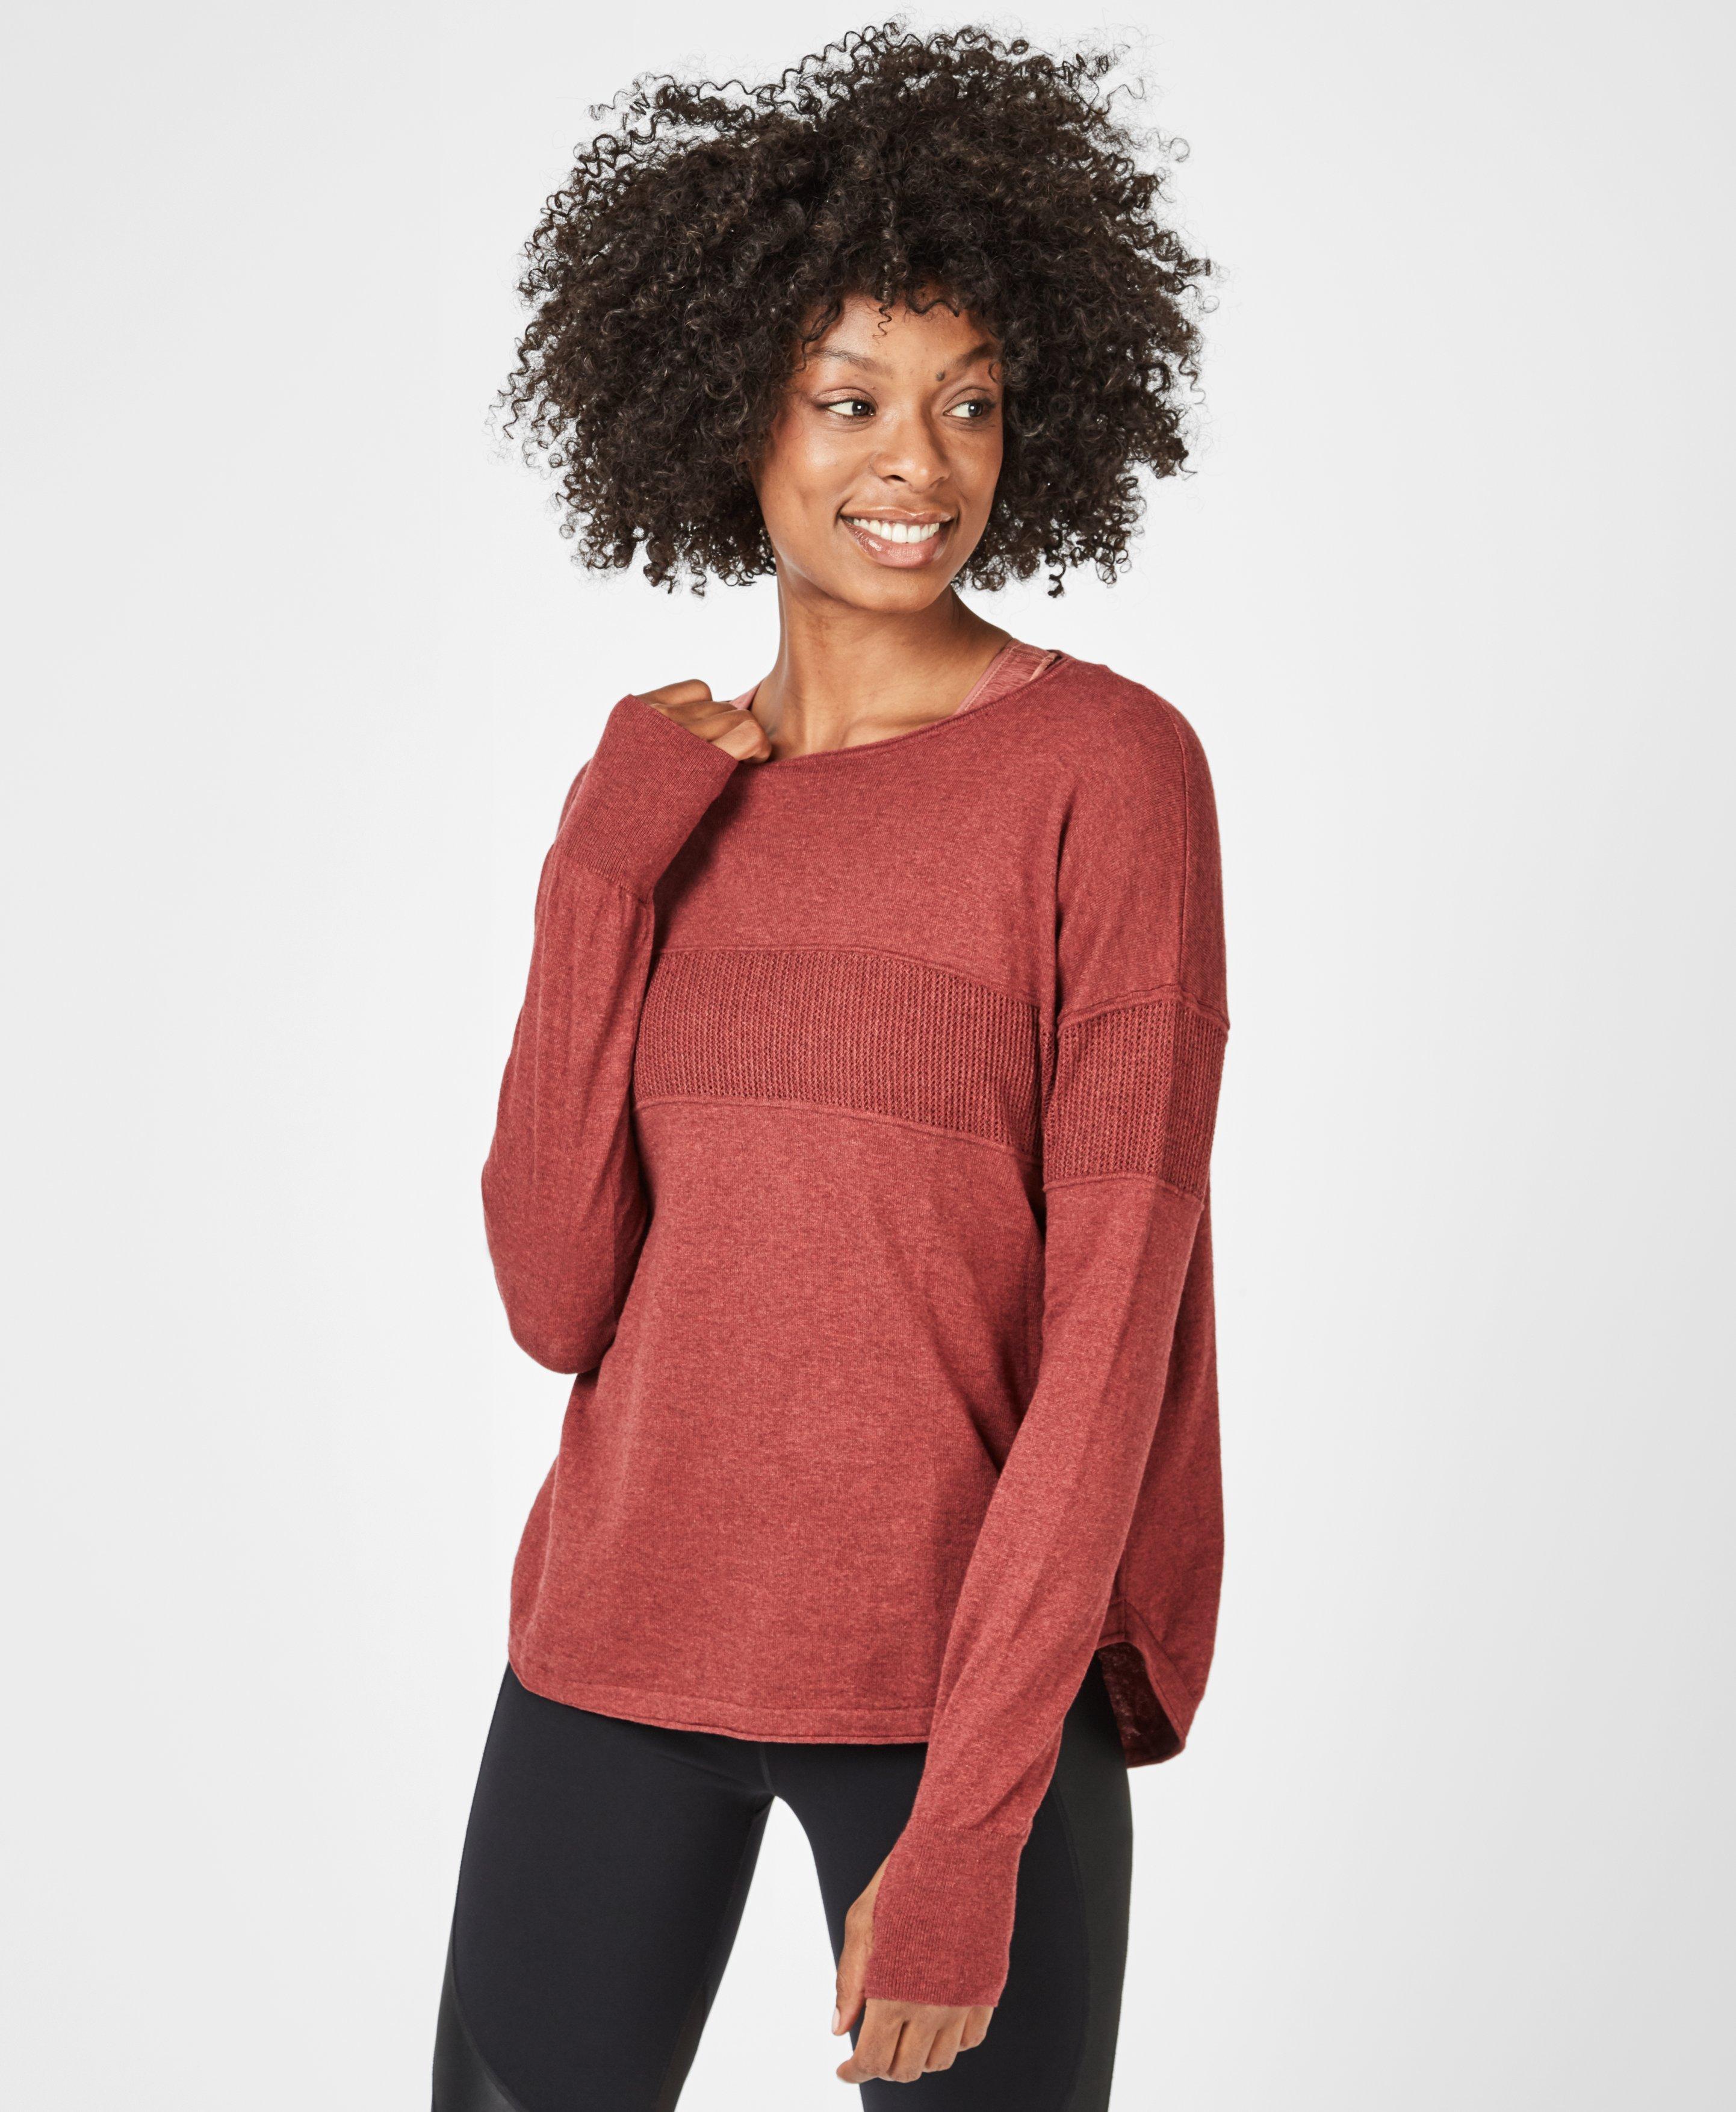 Sweaty Betty Cotton Position Knitted Sweater in Rust Marl (Red) - Lyst